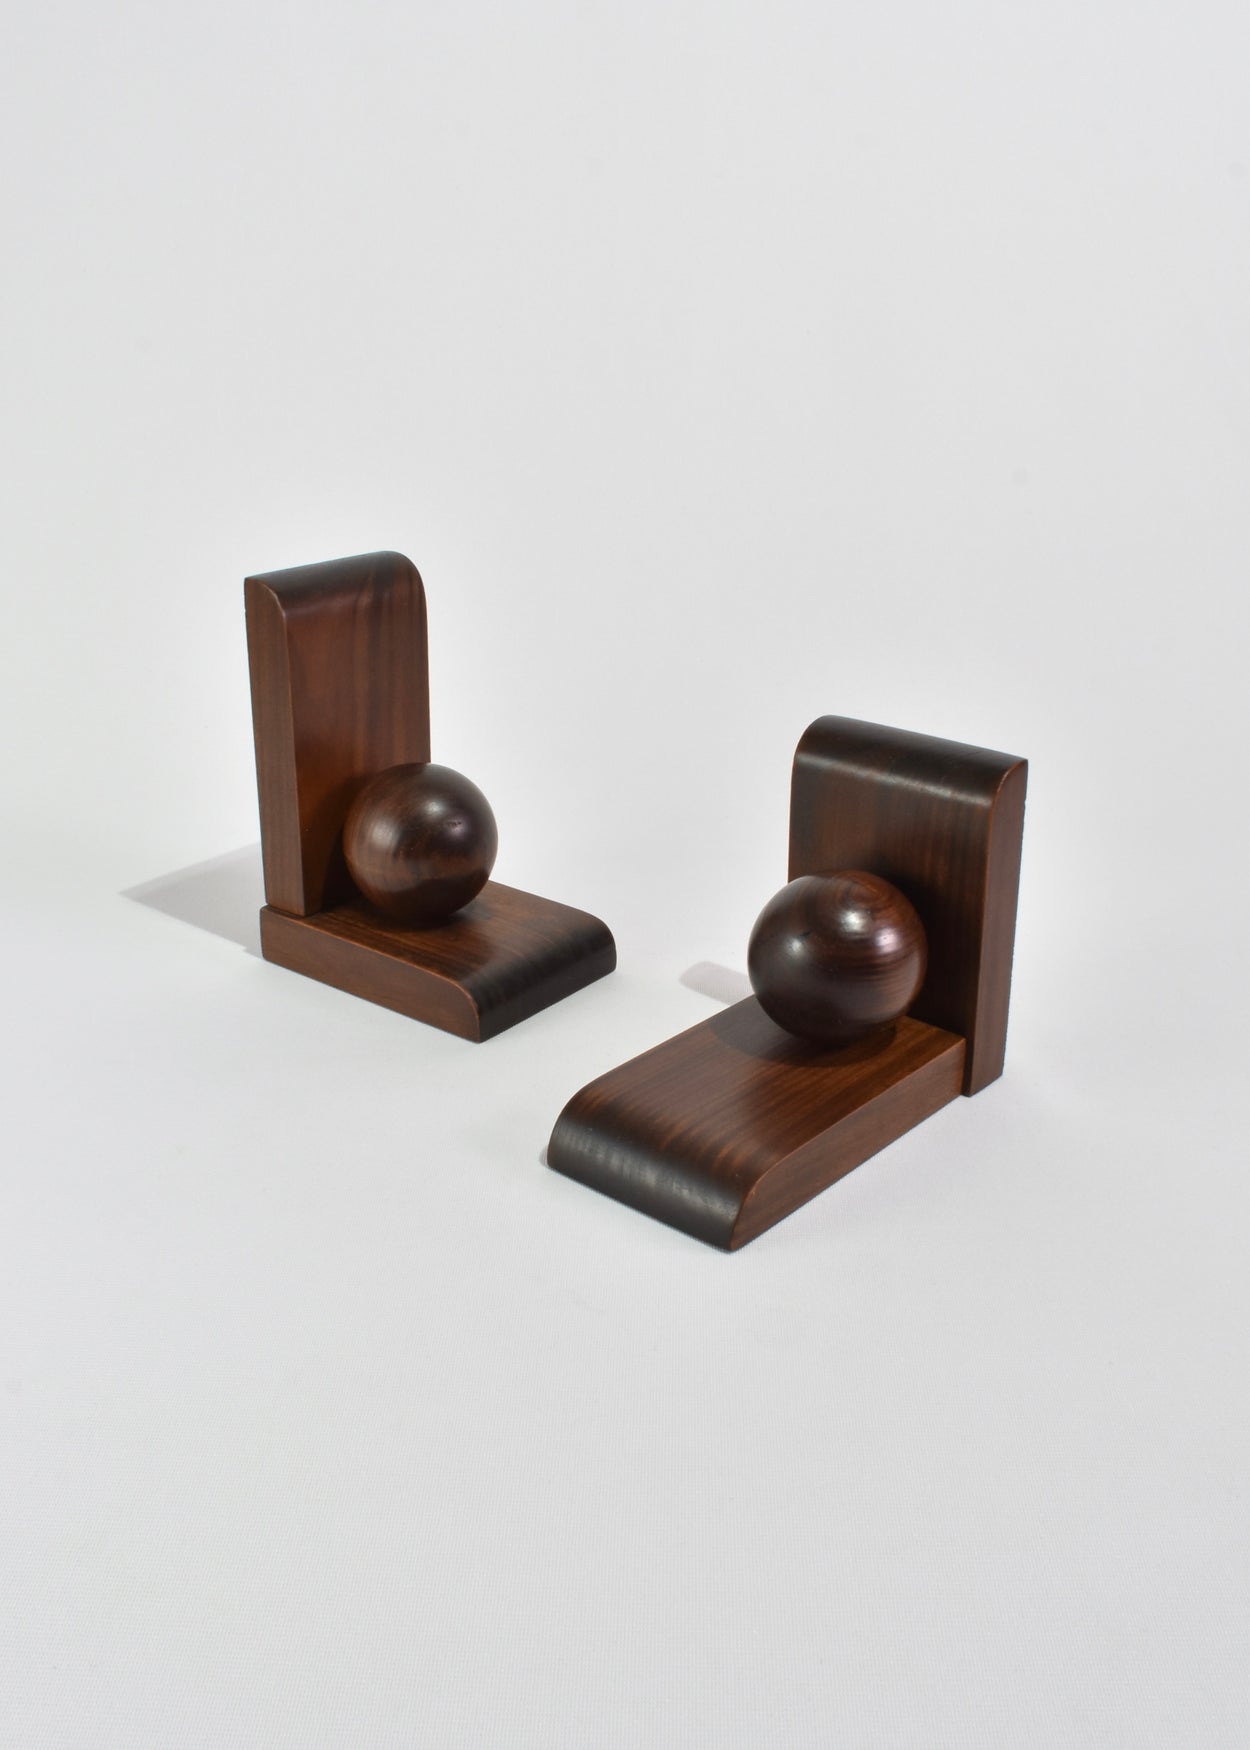 Wooden Sphere Bookends